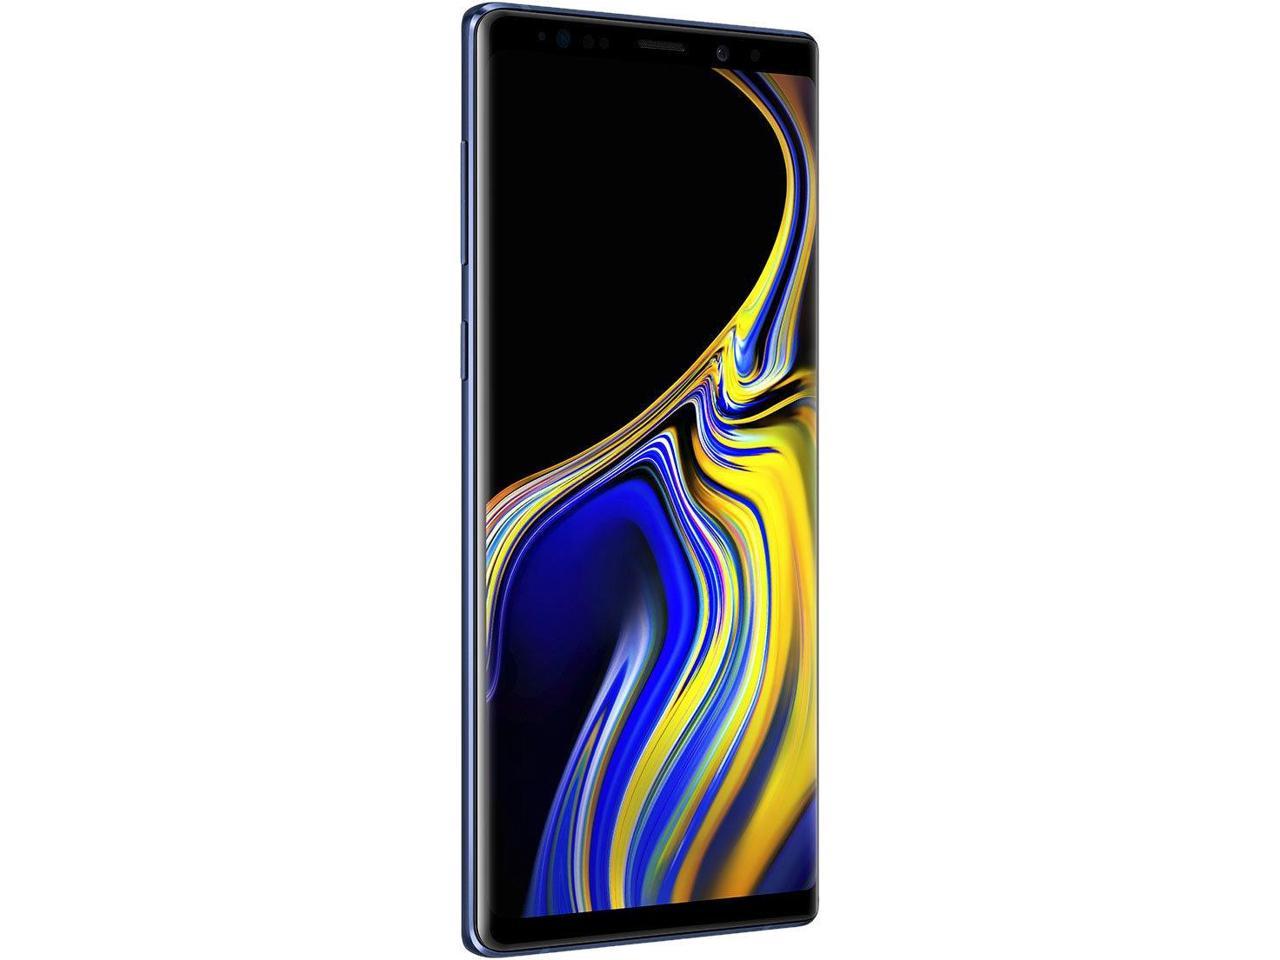 Samsung Galaxy Note 9 Unlocked Phone with 6.4